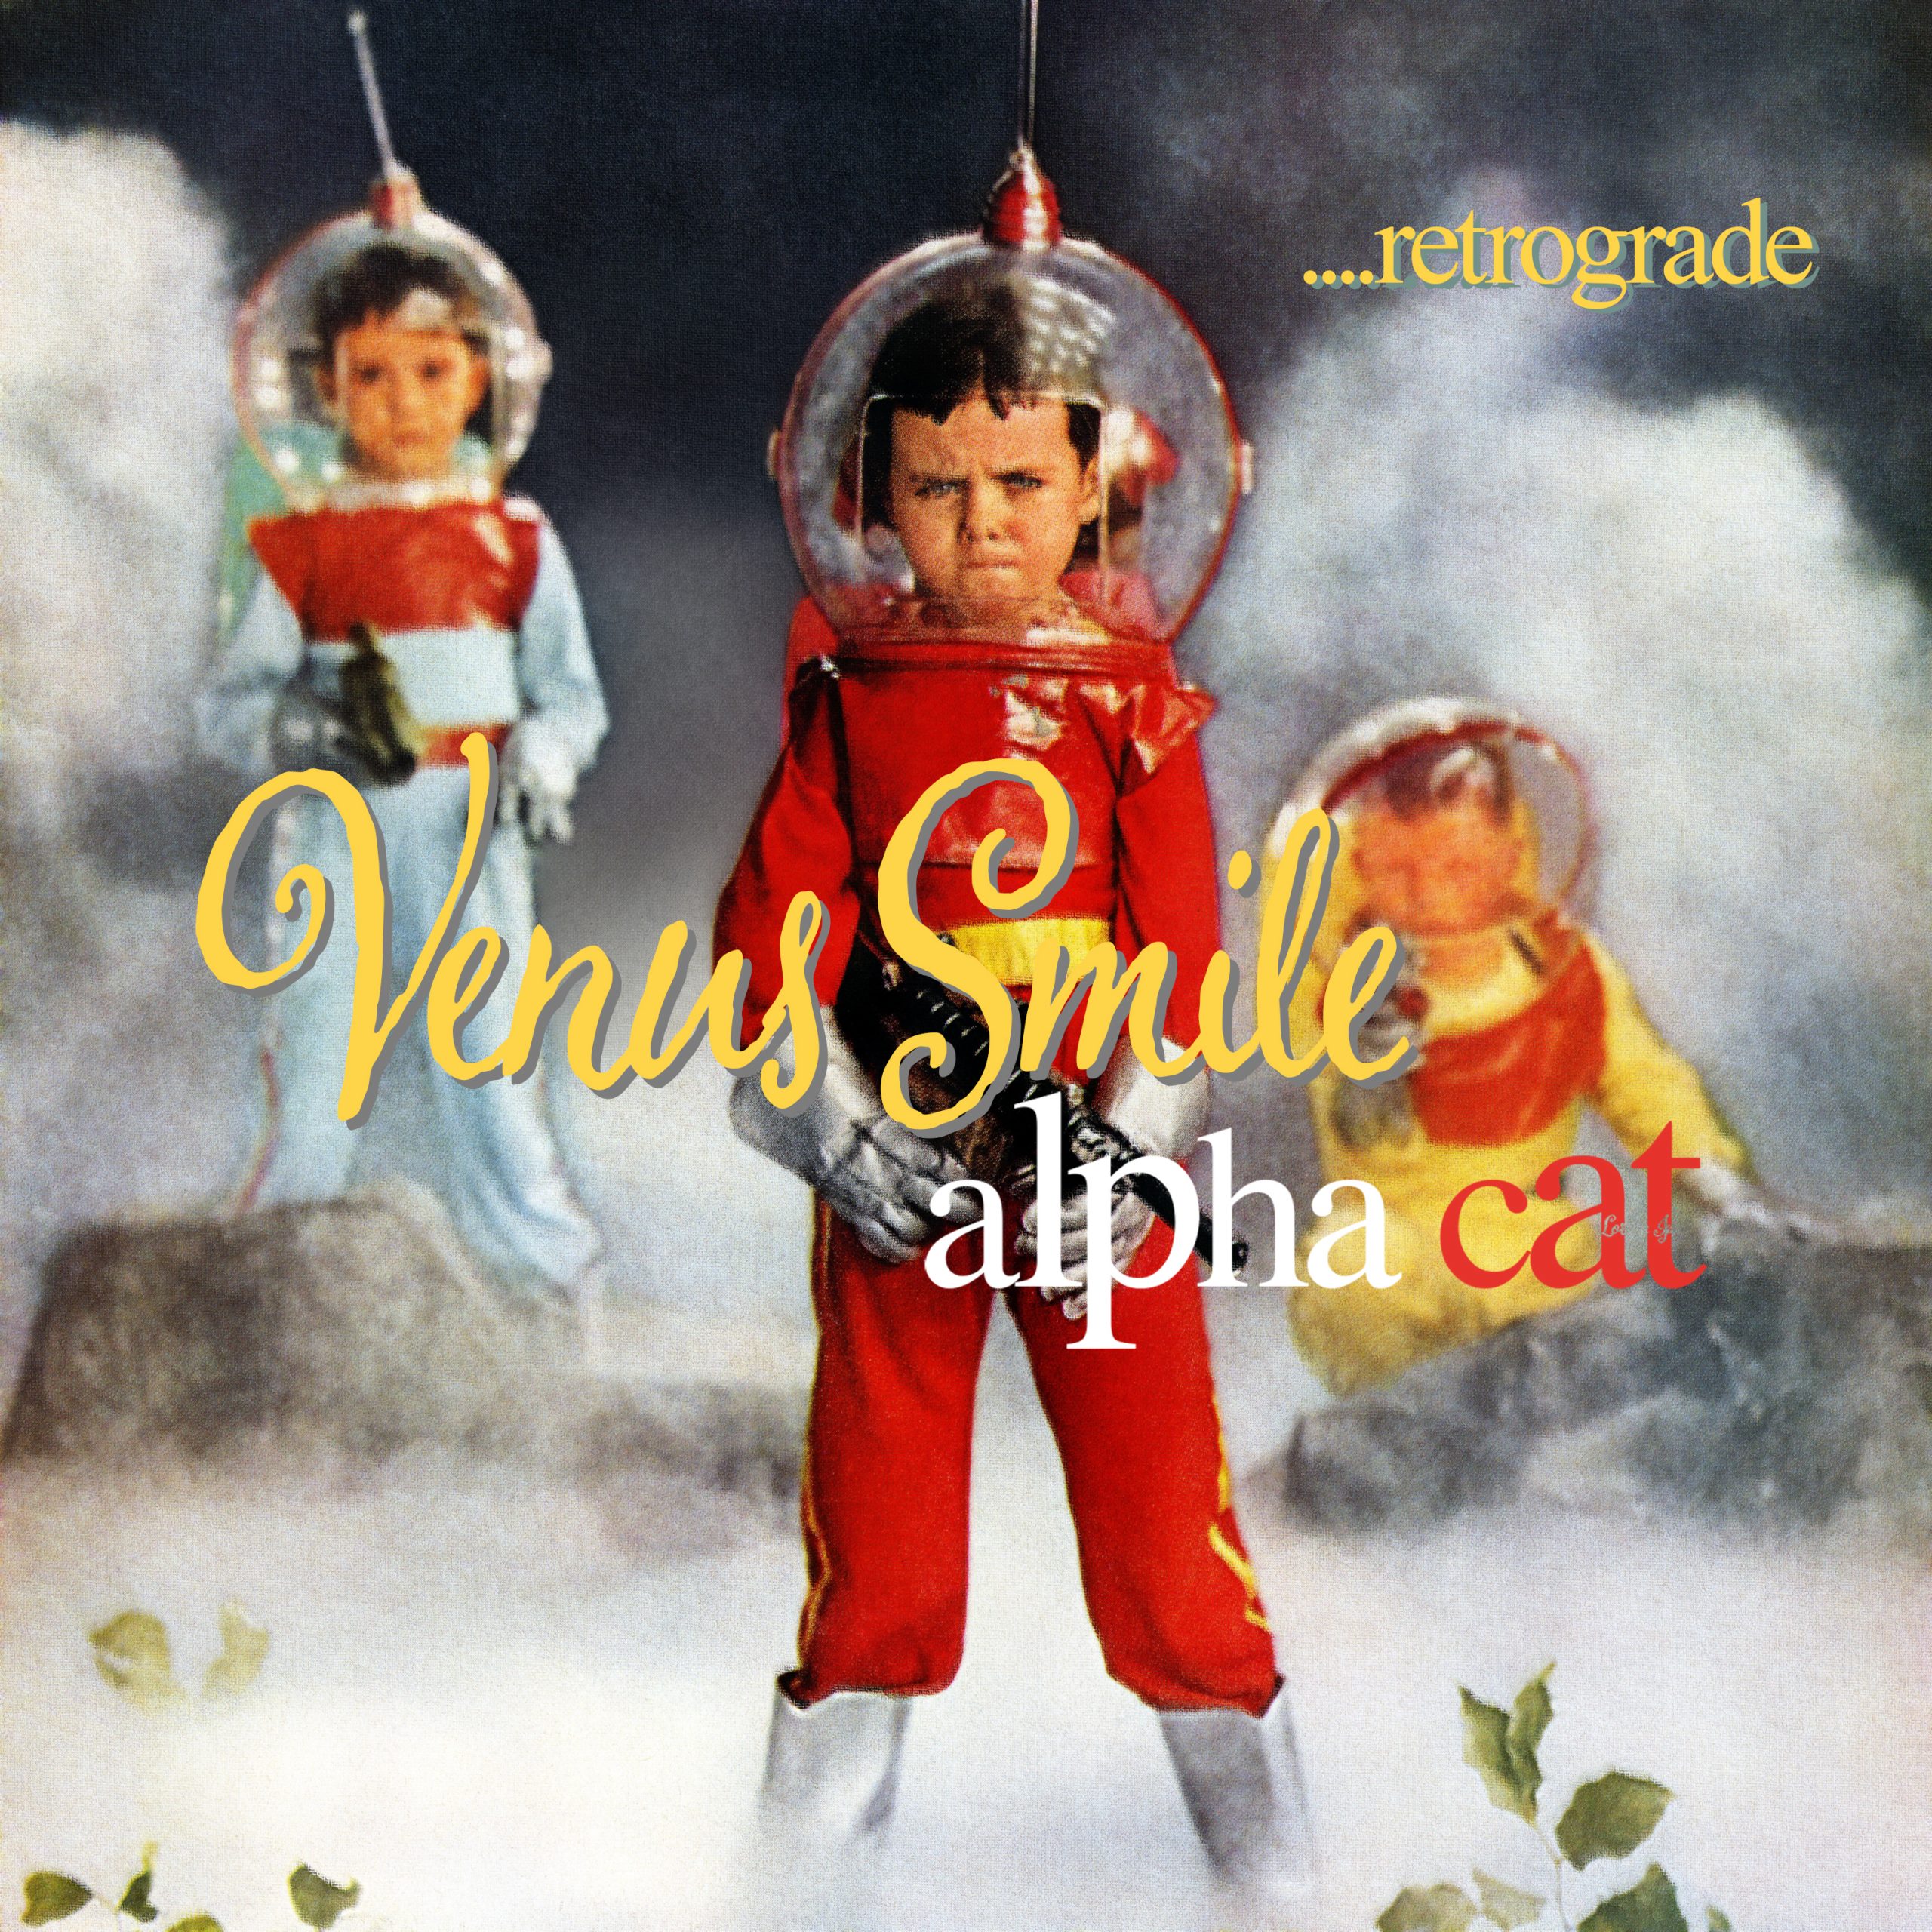 Listen to the uplifting, touching and emotional new EP ‘Venus Smile… Retrograde’ from ‘Alpha Cat’.